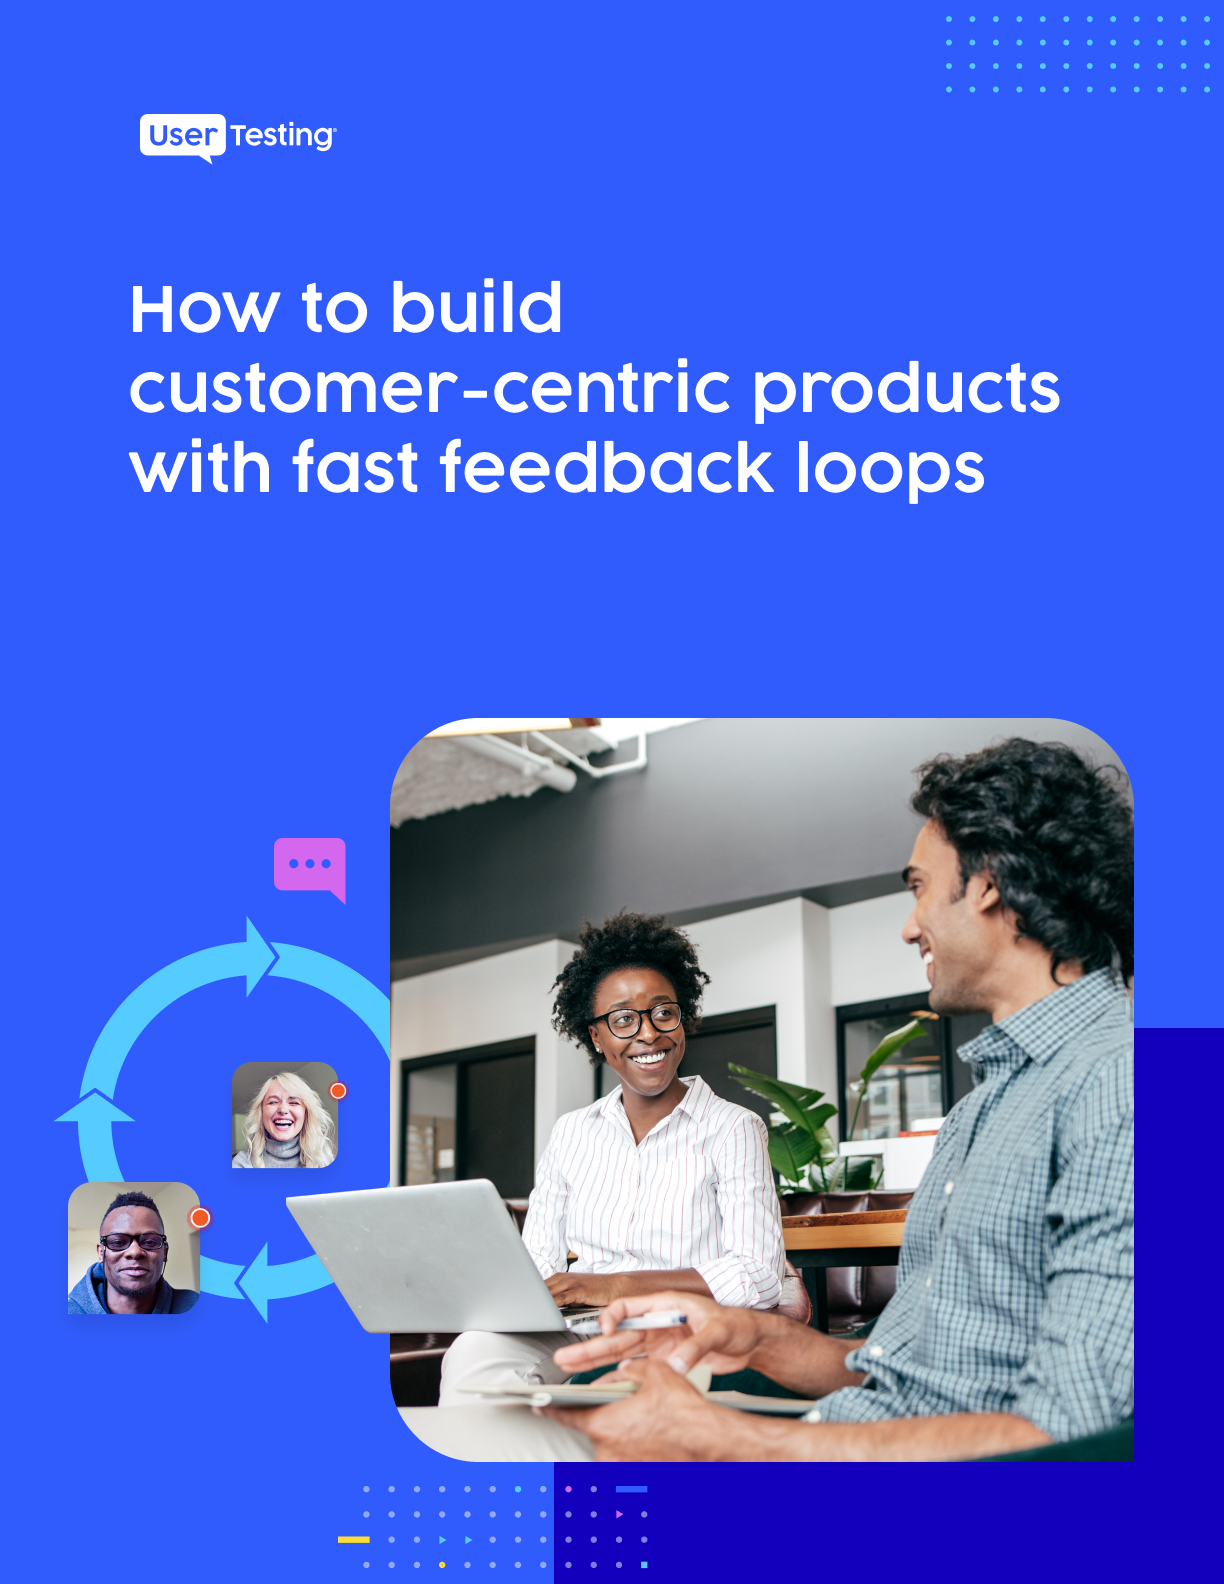 How to build customer-centric products with fast feedback loops